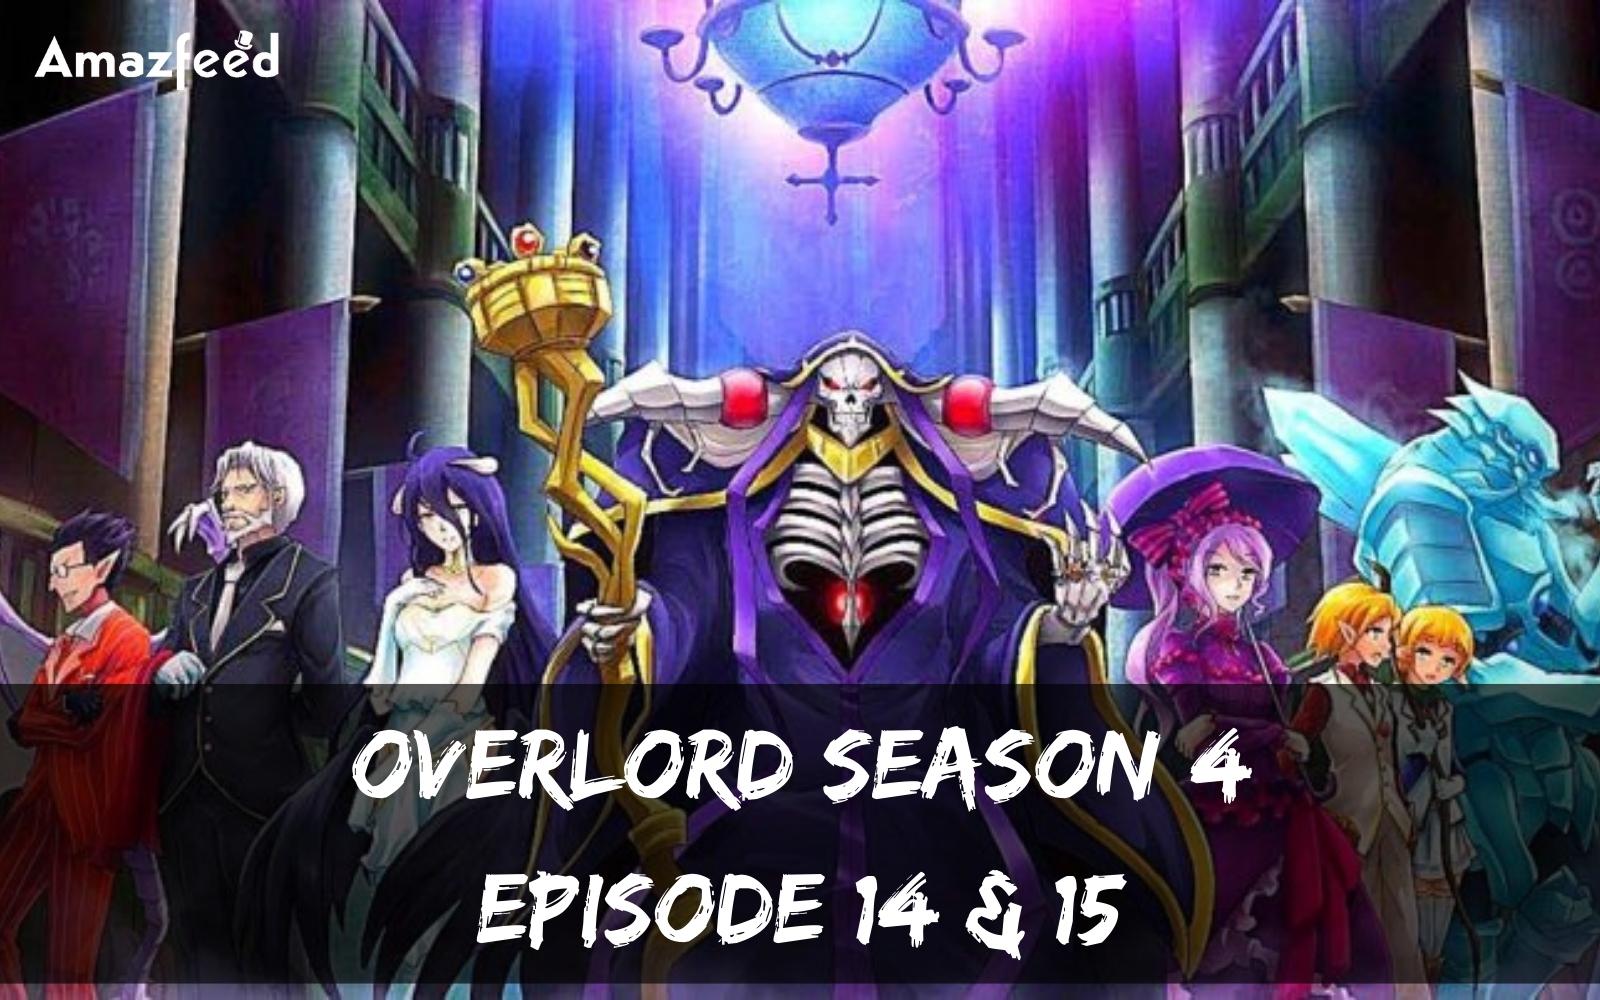 Overlord Season 4 Episode 14 & 15 is Coming Out? Is Overlord Season 4  ended? Current Status of Overlord Season 4 » Amazfeed